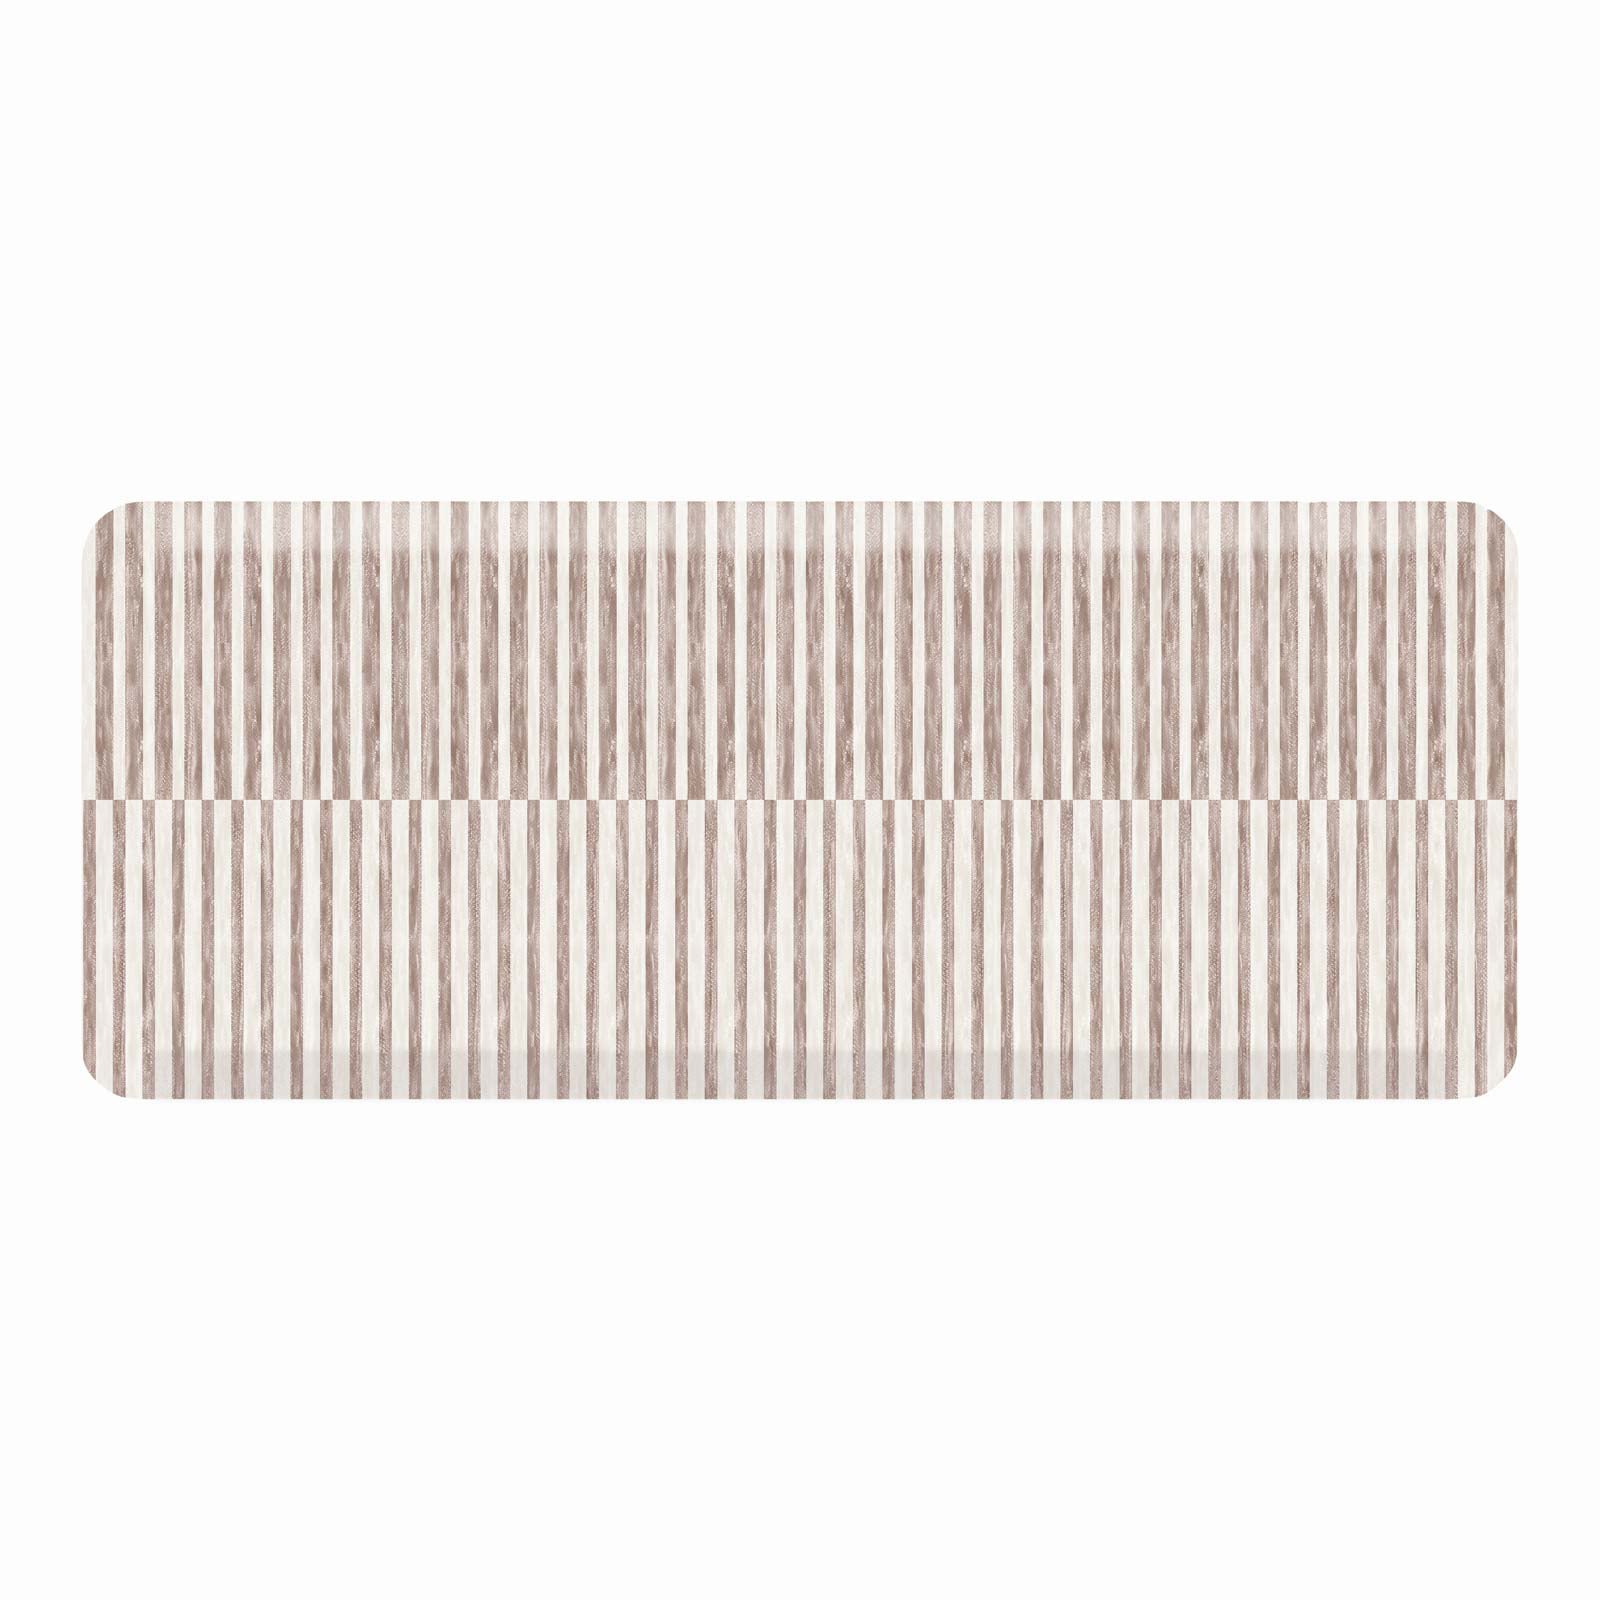 Reese chai beige and white inverted stripe standing mat shown in size 22x54